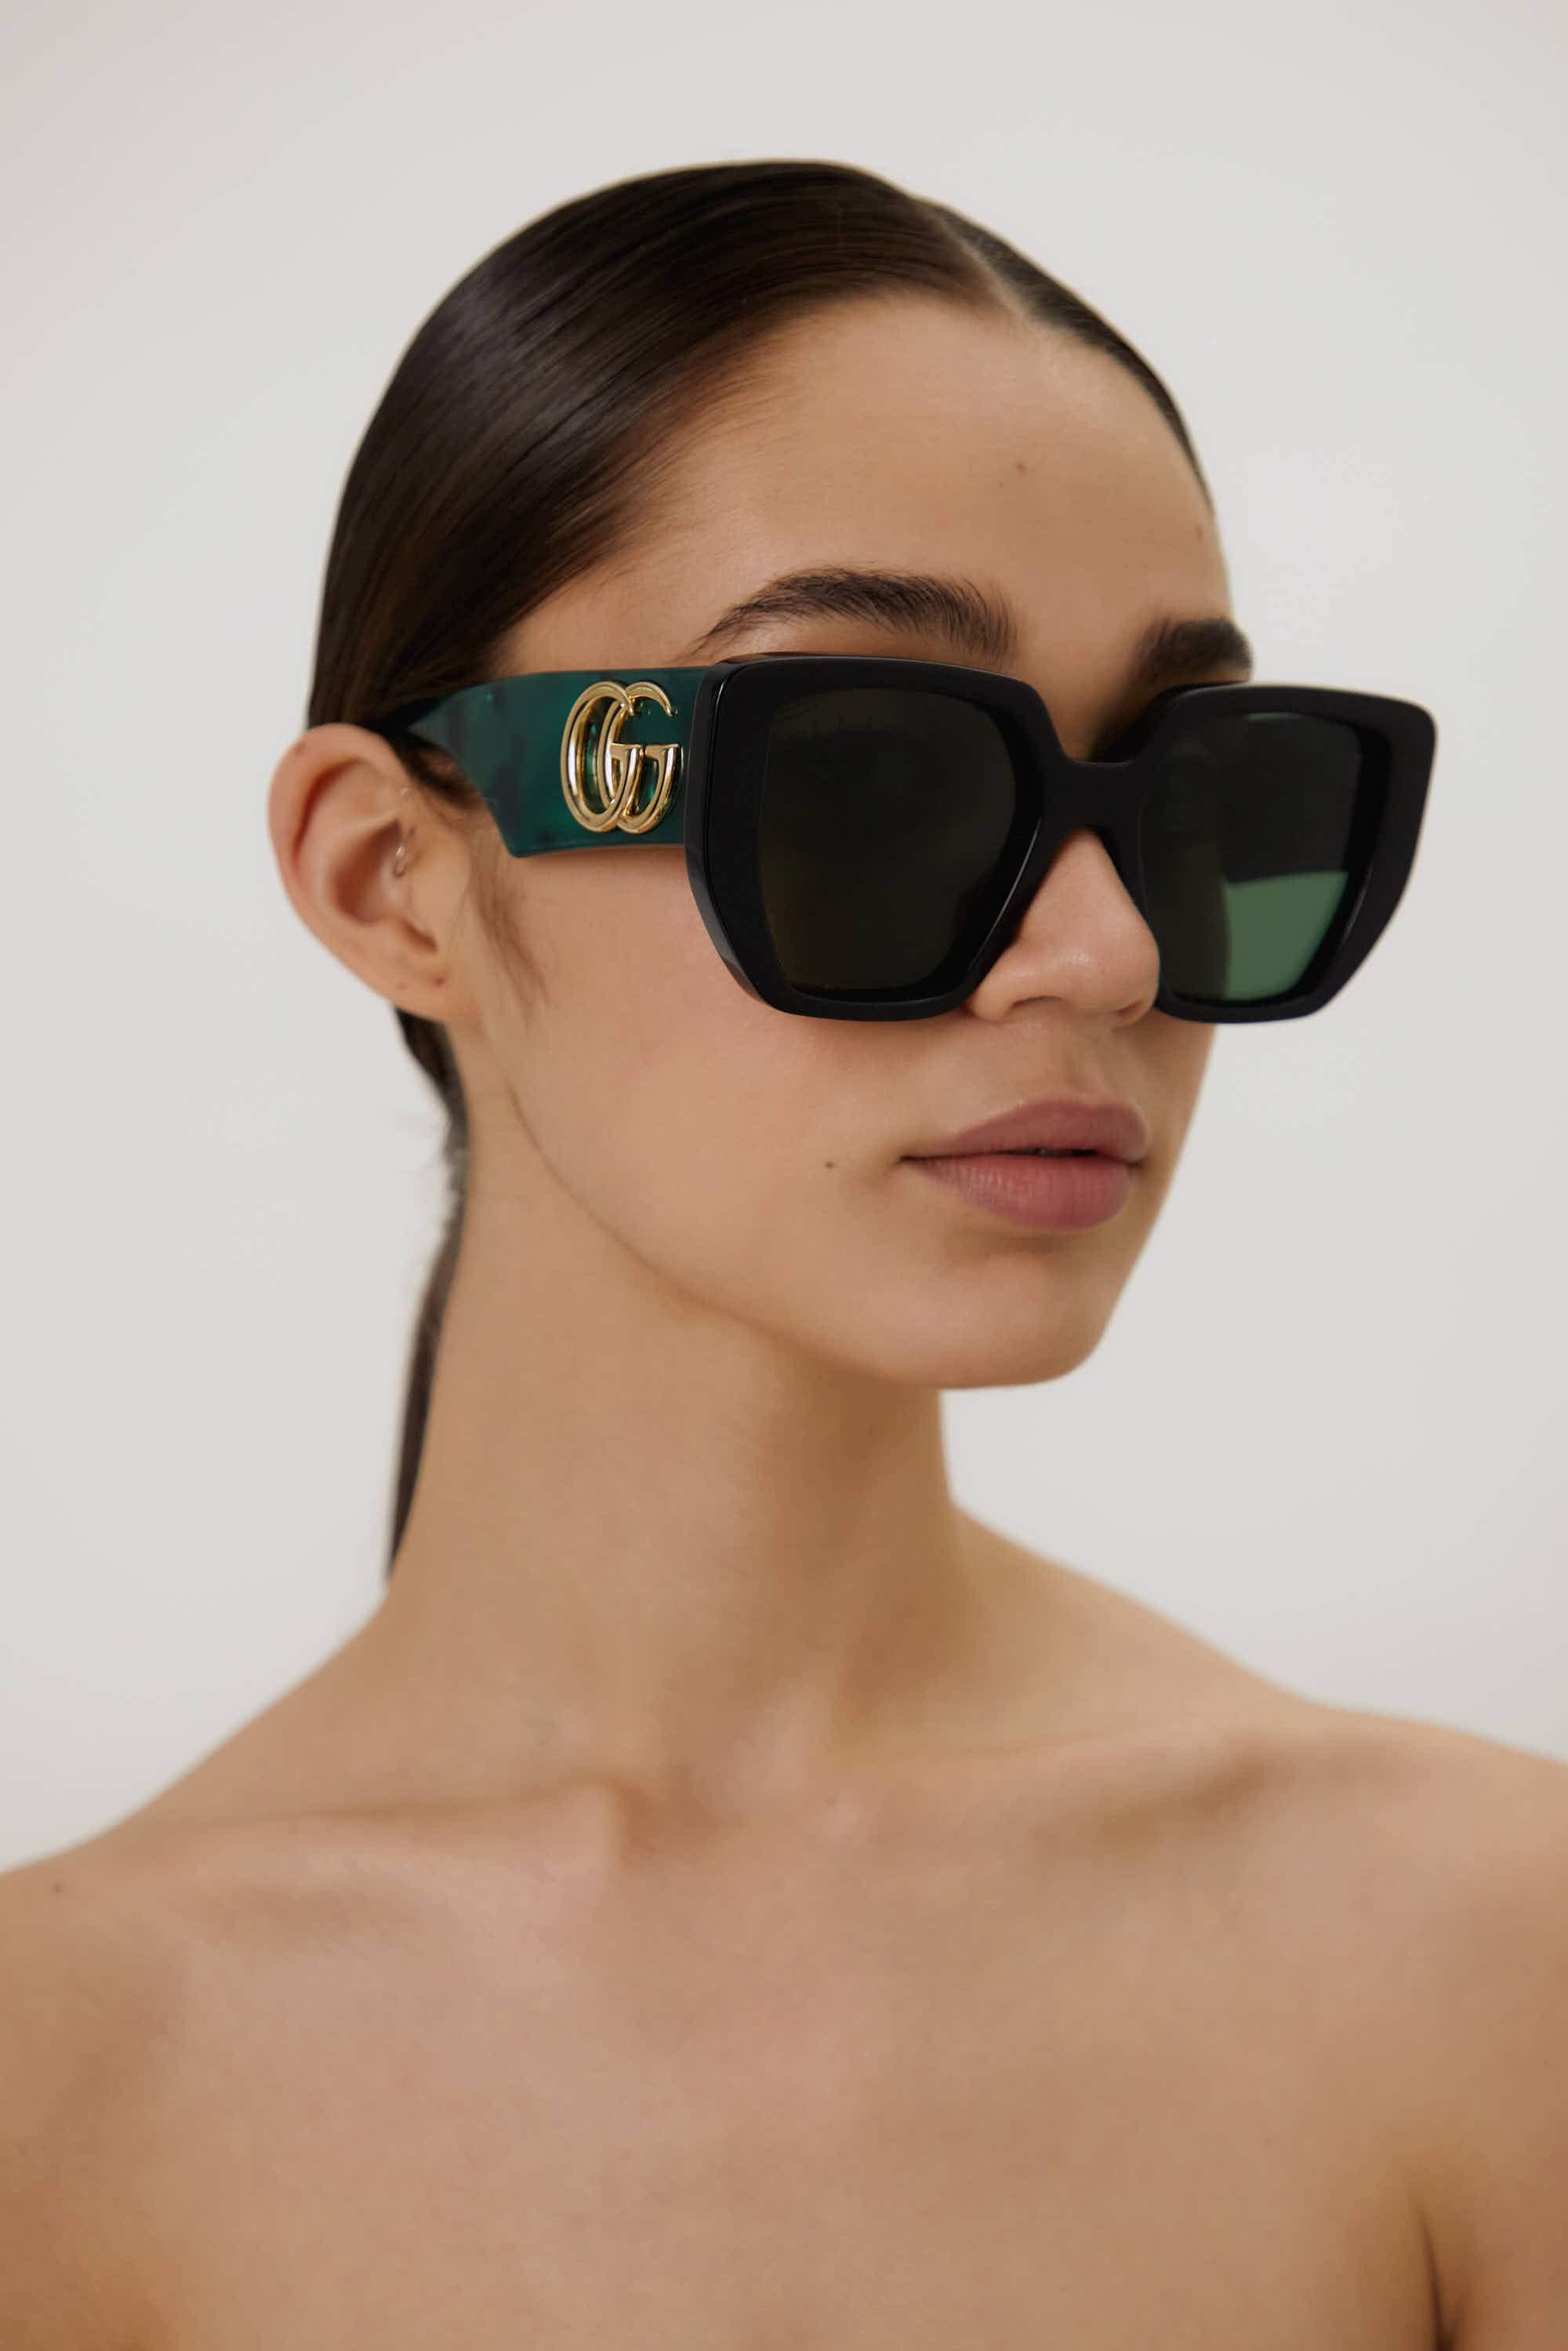 Gucci Acetate Oversized Square Frame Sunglasses in Green | Lyst